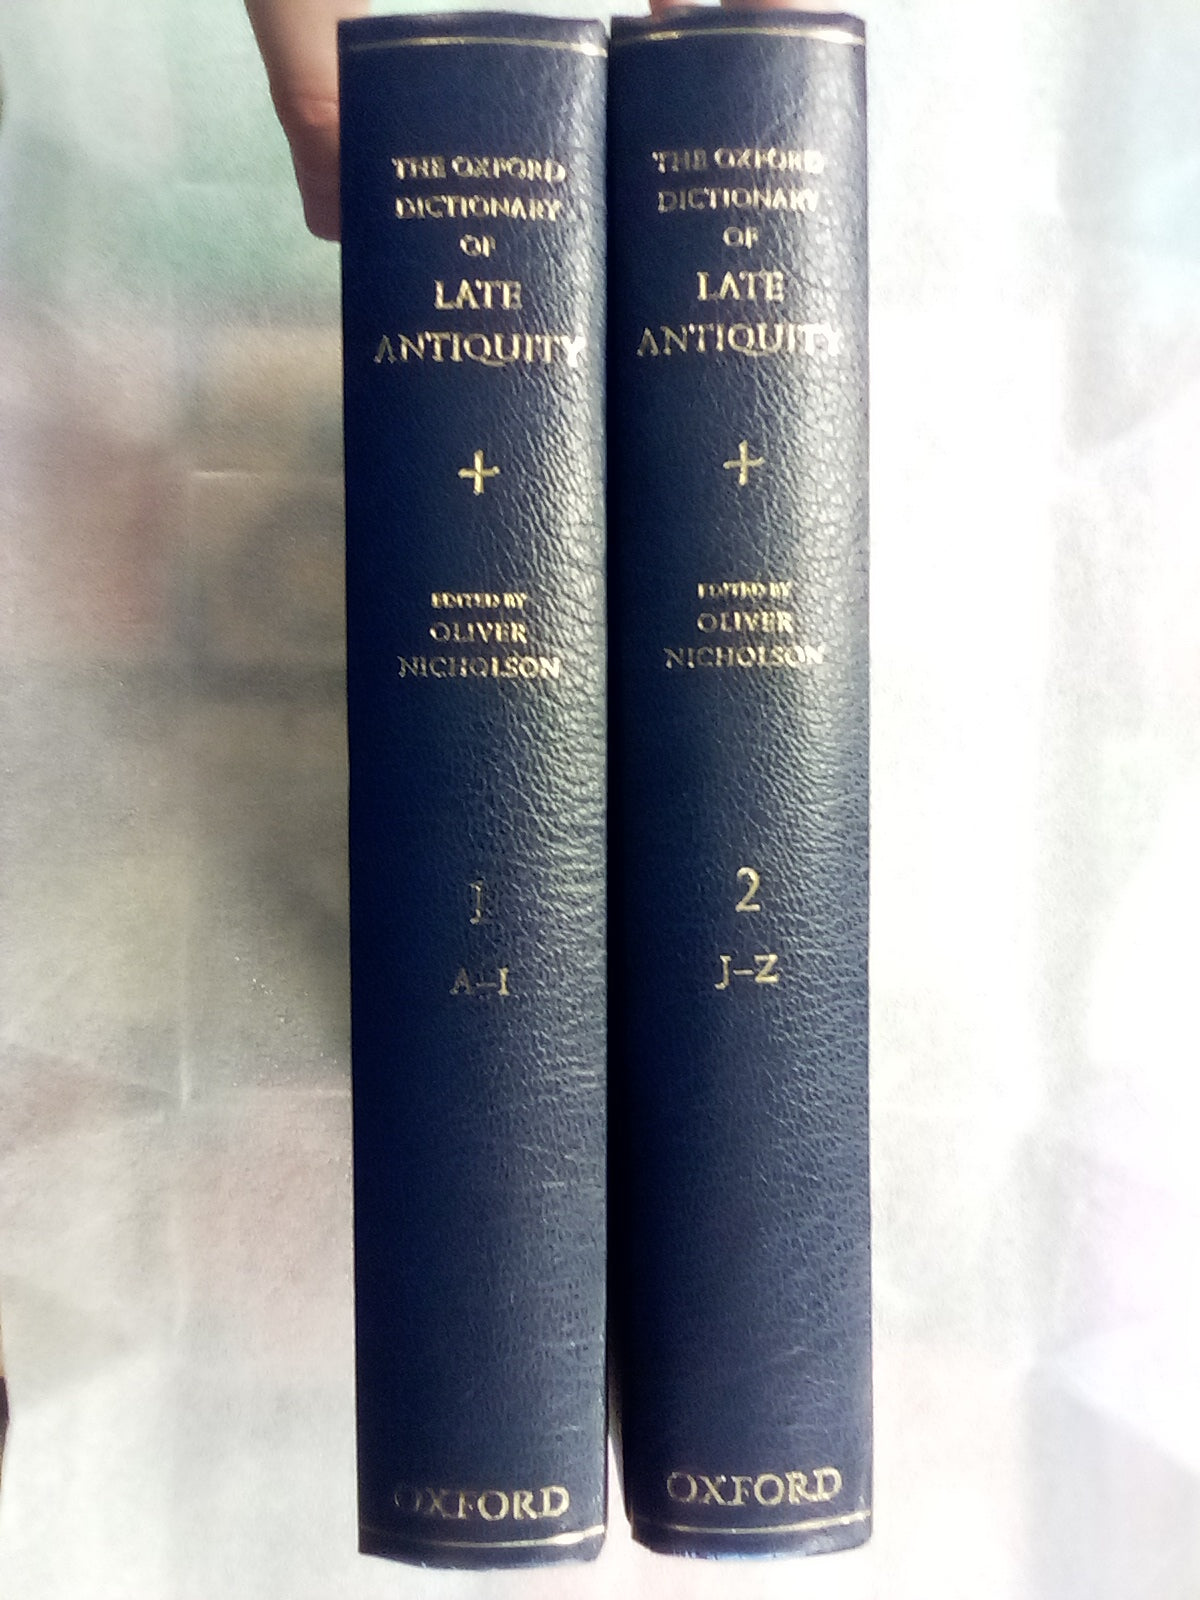 The Oxford Dictionary of Late Antiquity - Volumes 1 & 2